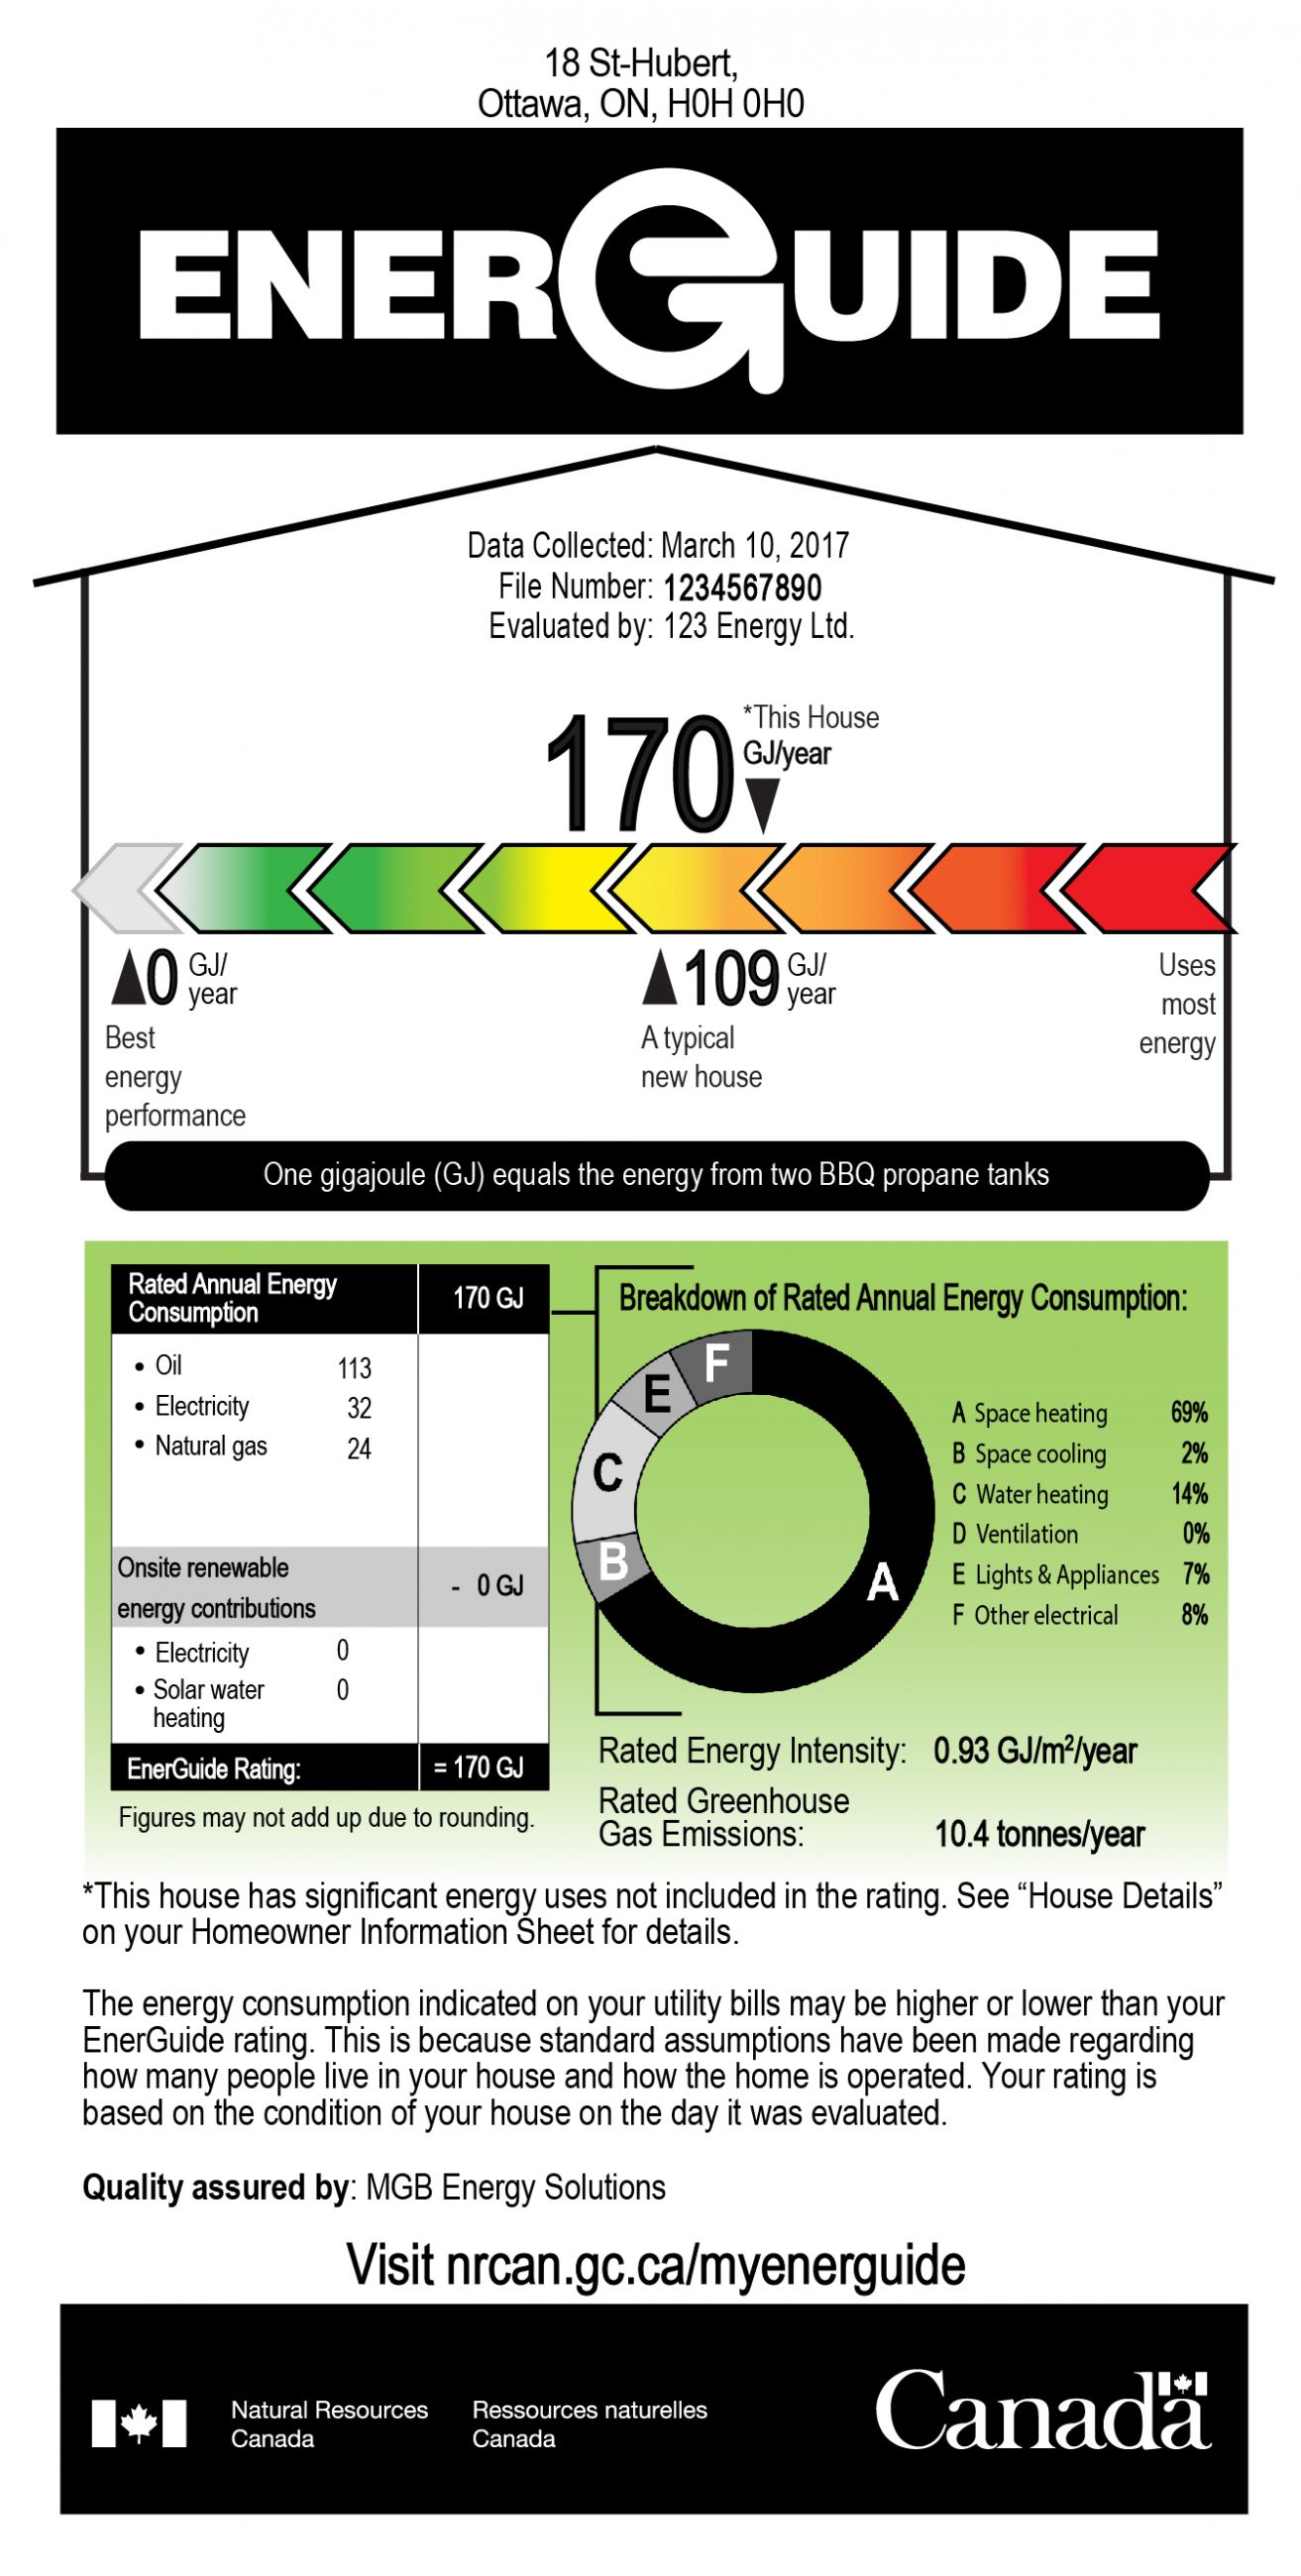 An example of an EnerGuide label that provides information about the evaluation for the homeowner, EnerGuide rating, EnerGuide rating scale, the calculation of the rating, and breakdown of the rated annual energy consumption